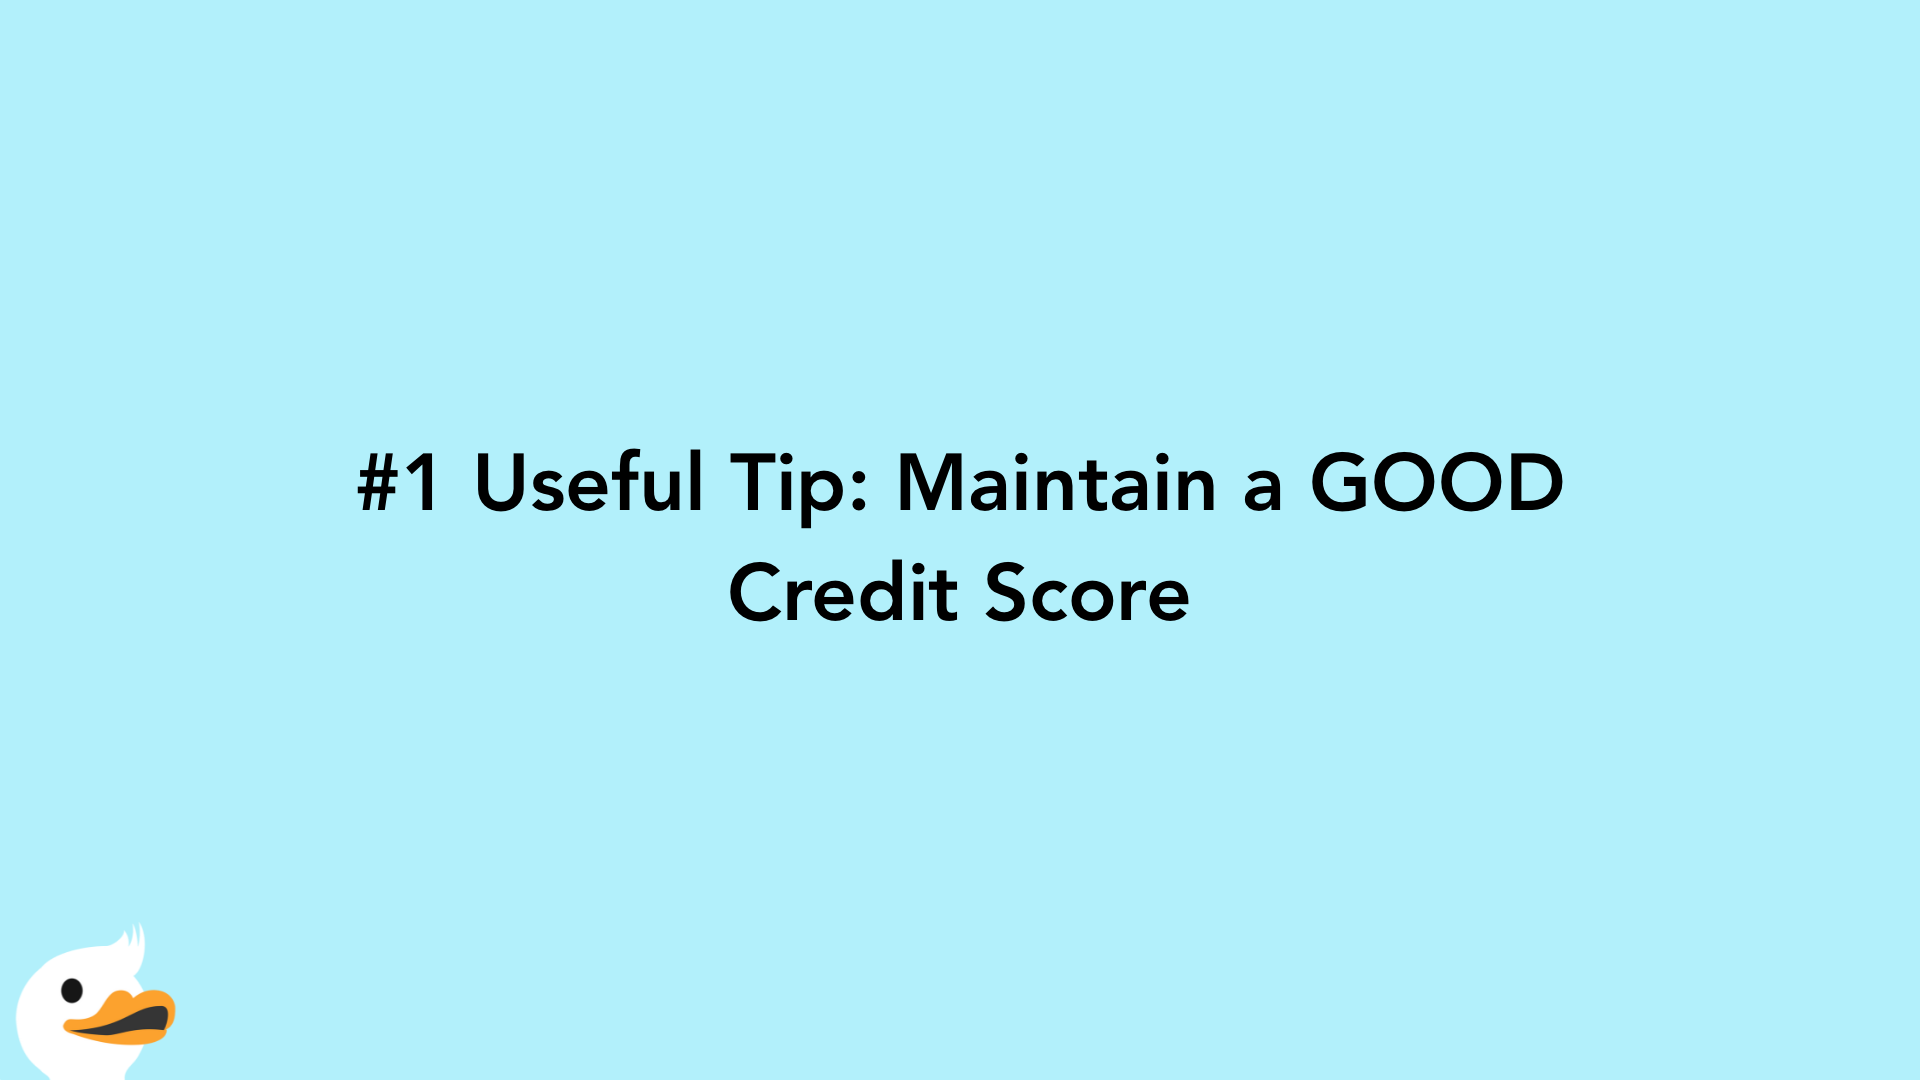 #1 Useful Tip: Maintain a GOOD Credit Score